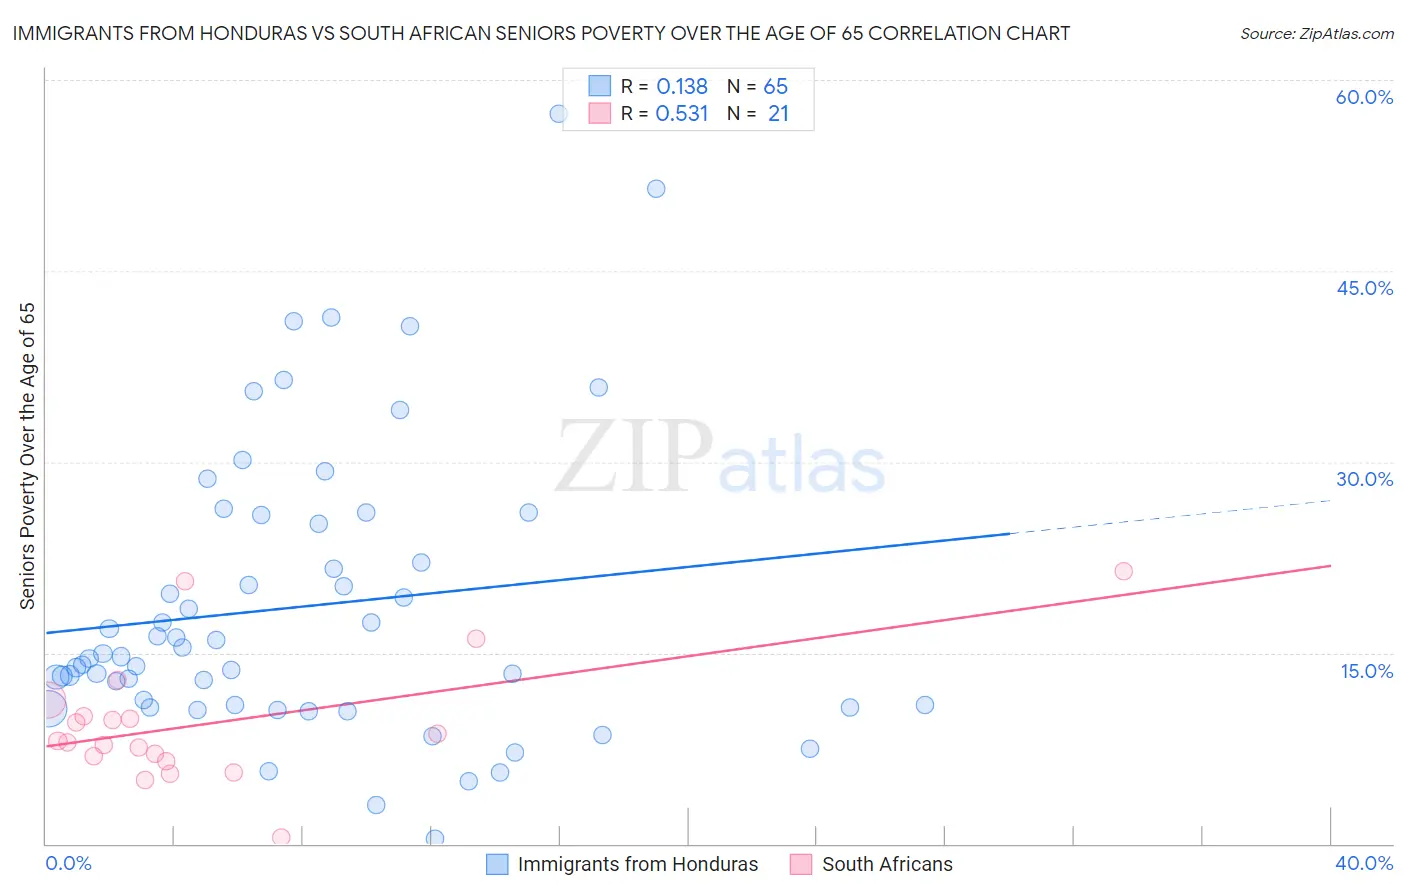 Immigrants from Honduras vs South African Seniors Poverty Over the Age of 65